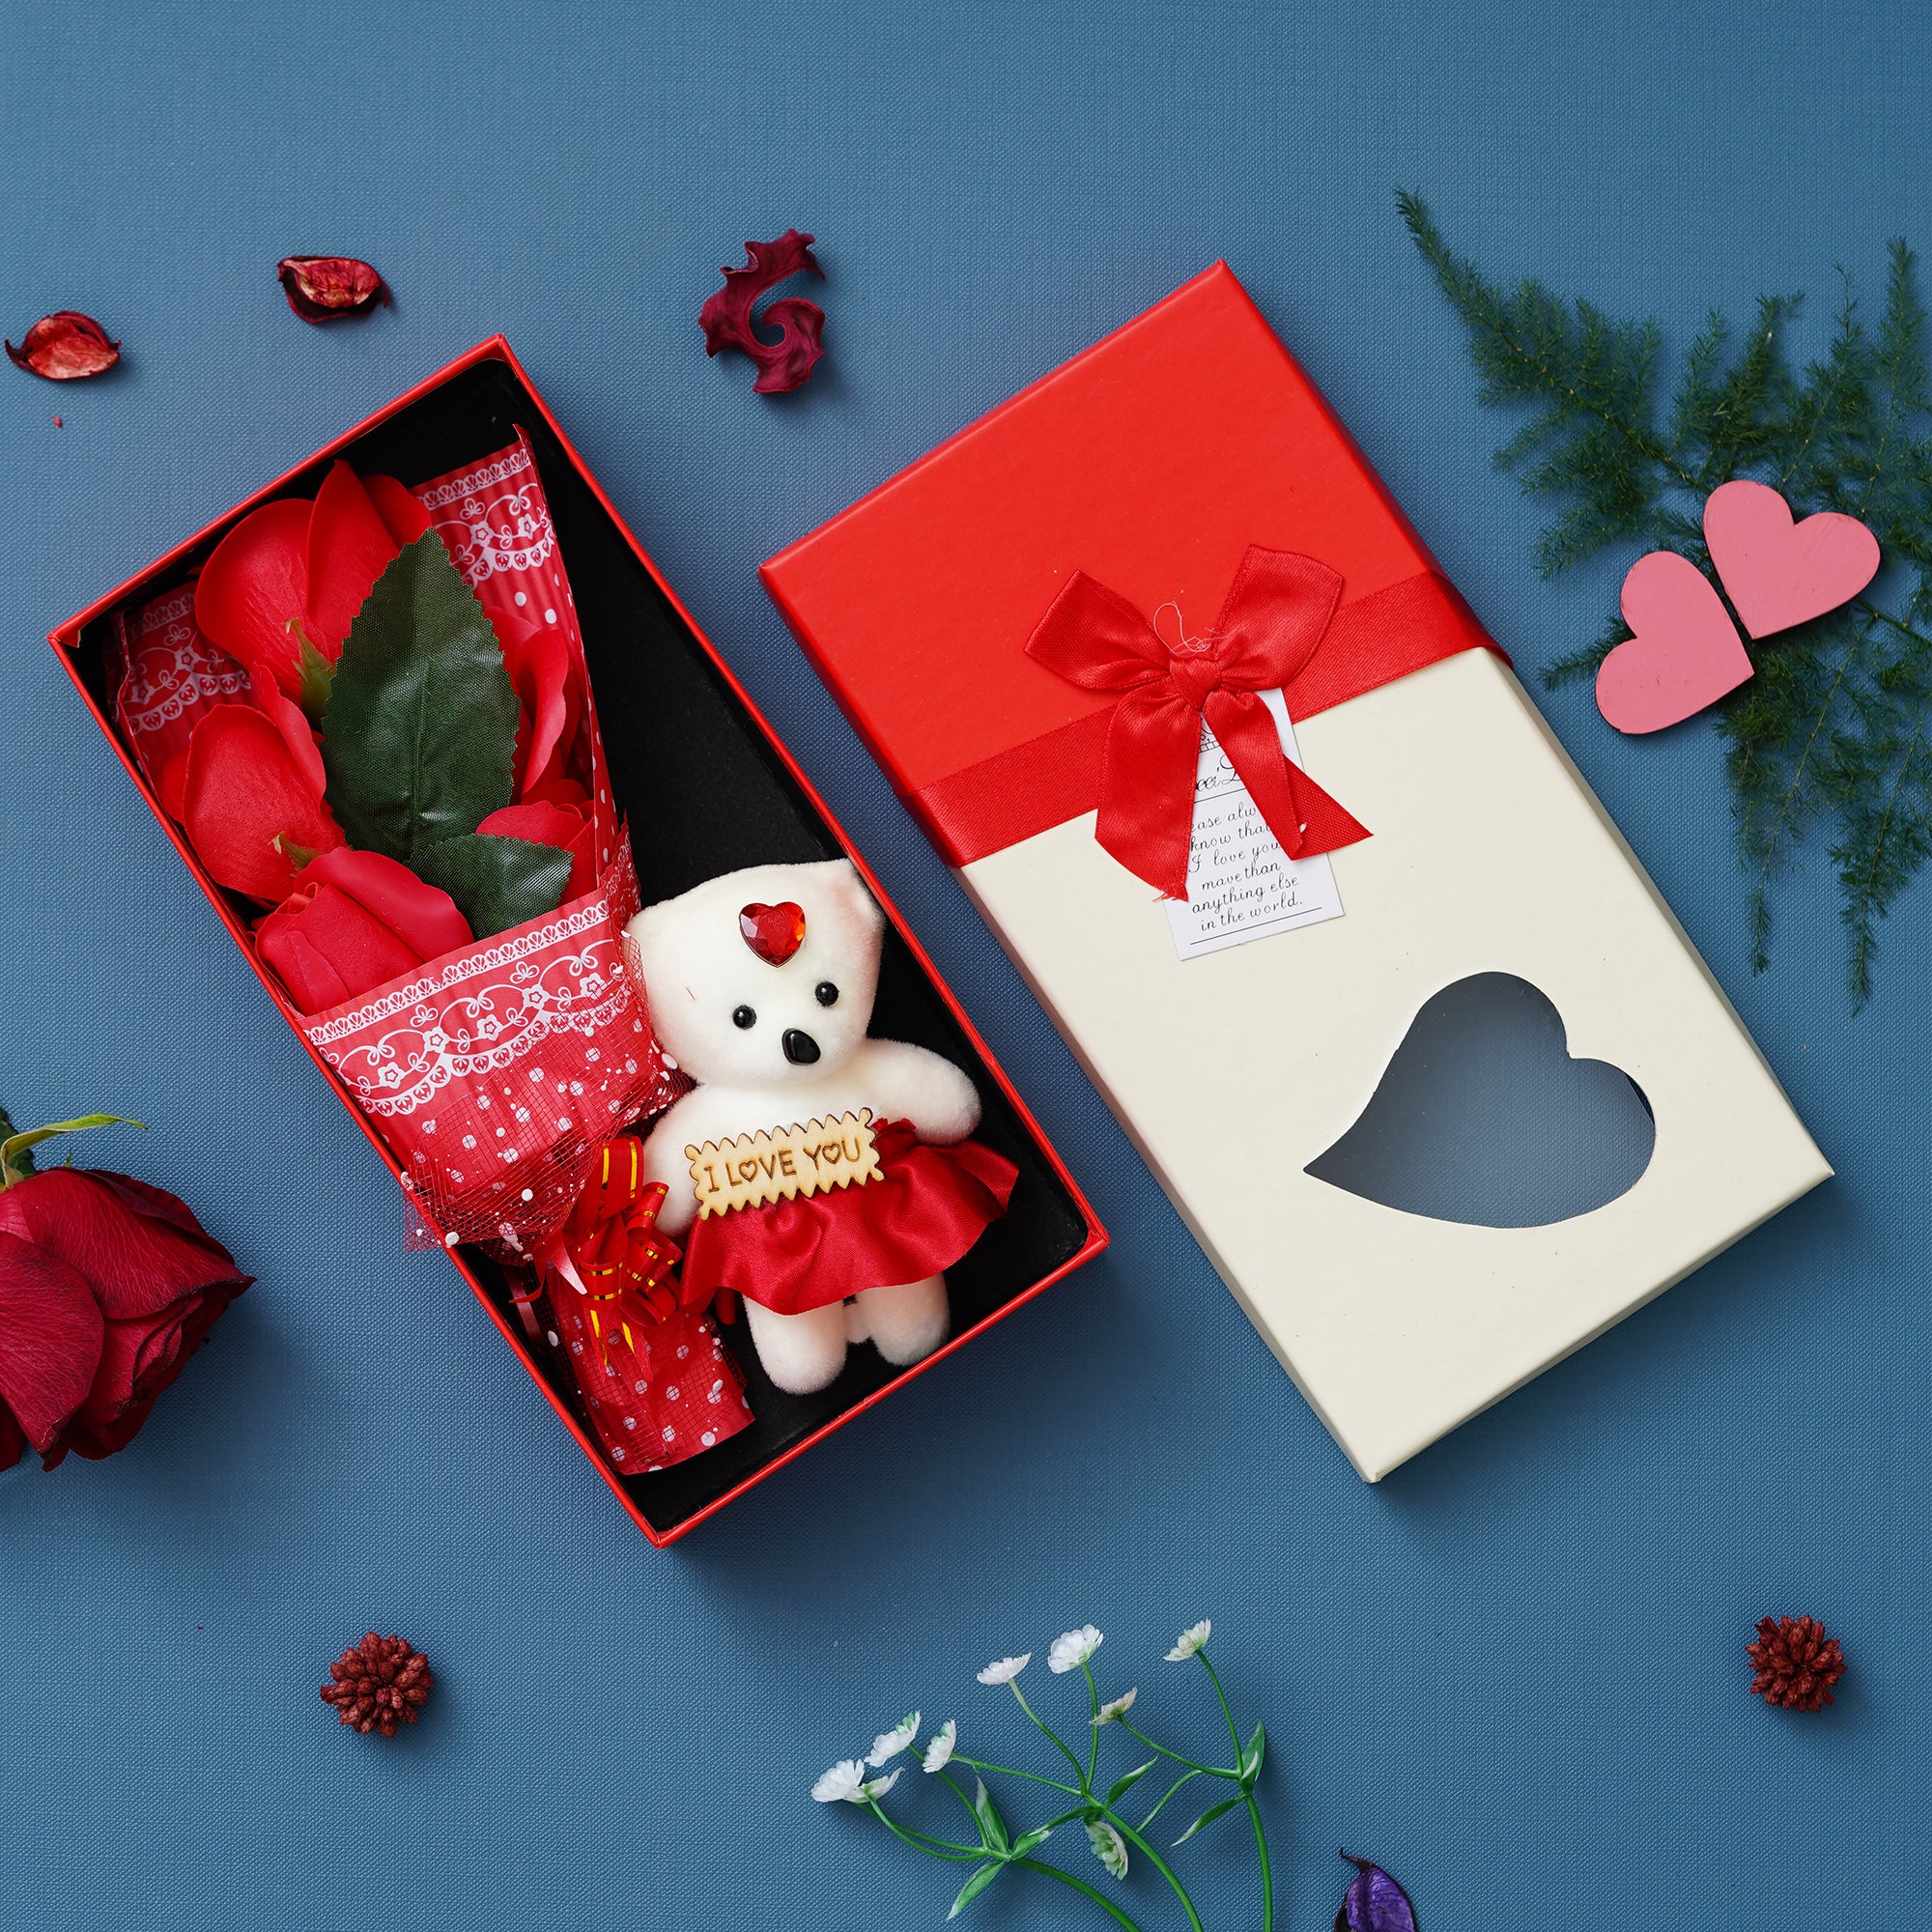 Valentine Combo of Pack of 8 Love Gift Cards, "20 Reasons Why I Love You" Printed on Little Red Hearts Decorative Wooden Gift Set Box, Red Roses Bouquet and White, Red Teddy Bear Valentine's Rectangle Shaped Gift Box 5